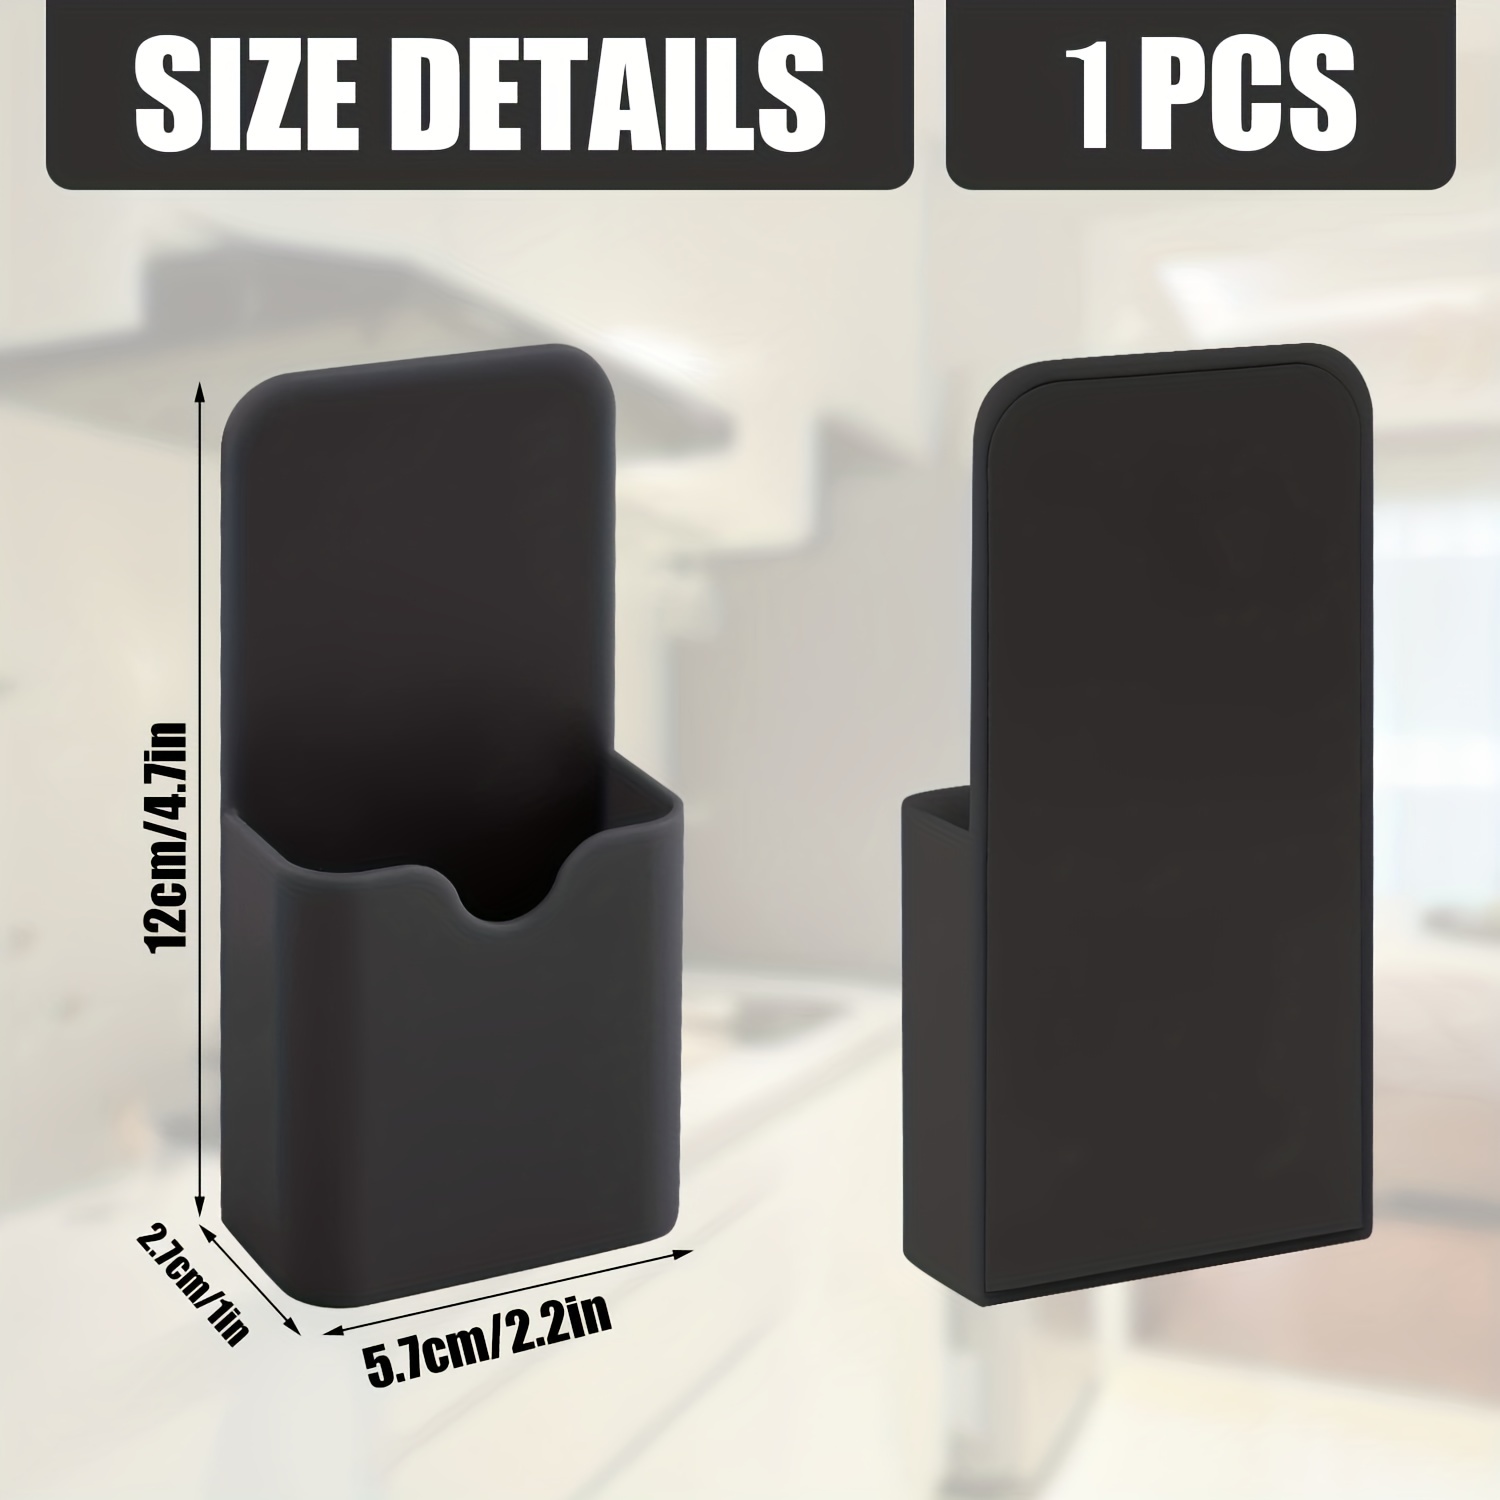 Bookmark Plastic Holders - Square Top - 2 1/4 x 6 1/2: StoreSMART -  Filing, Organizing, and Display for Office, School, Warehouse, and Home